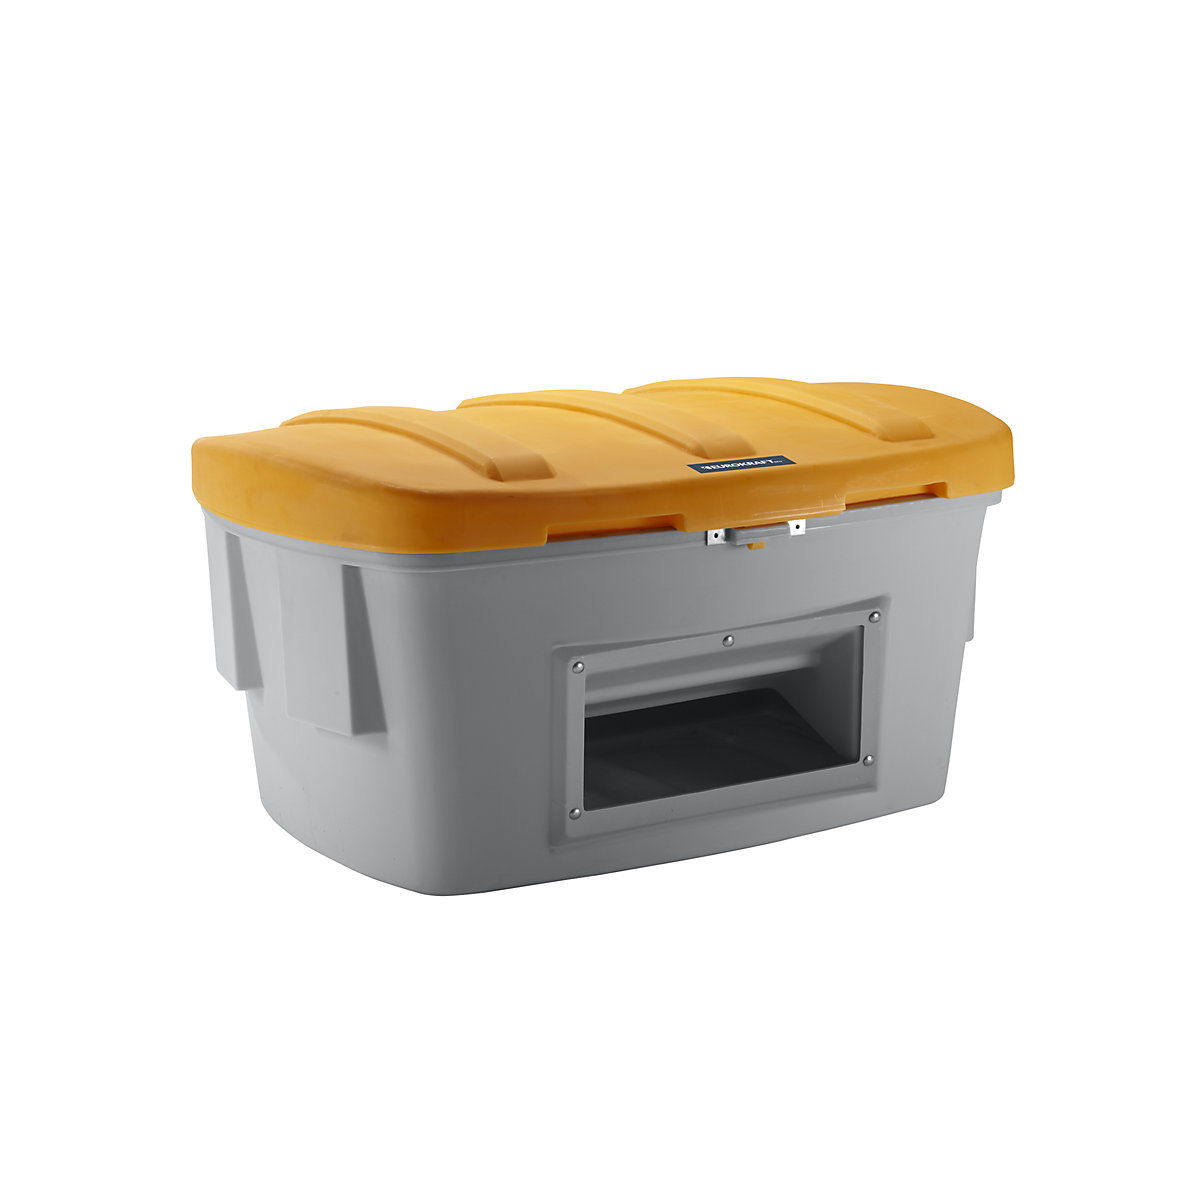 Universal / grit container – eurokraft pro, with dispenser opening, 1000 l, orange lid-10